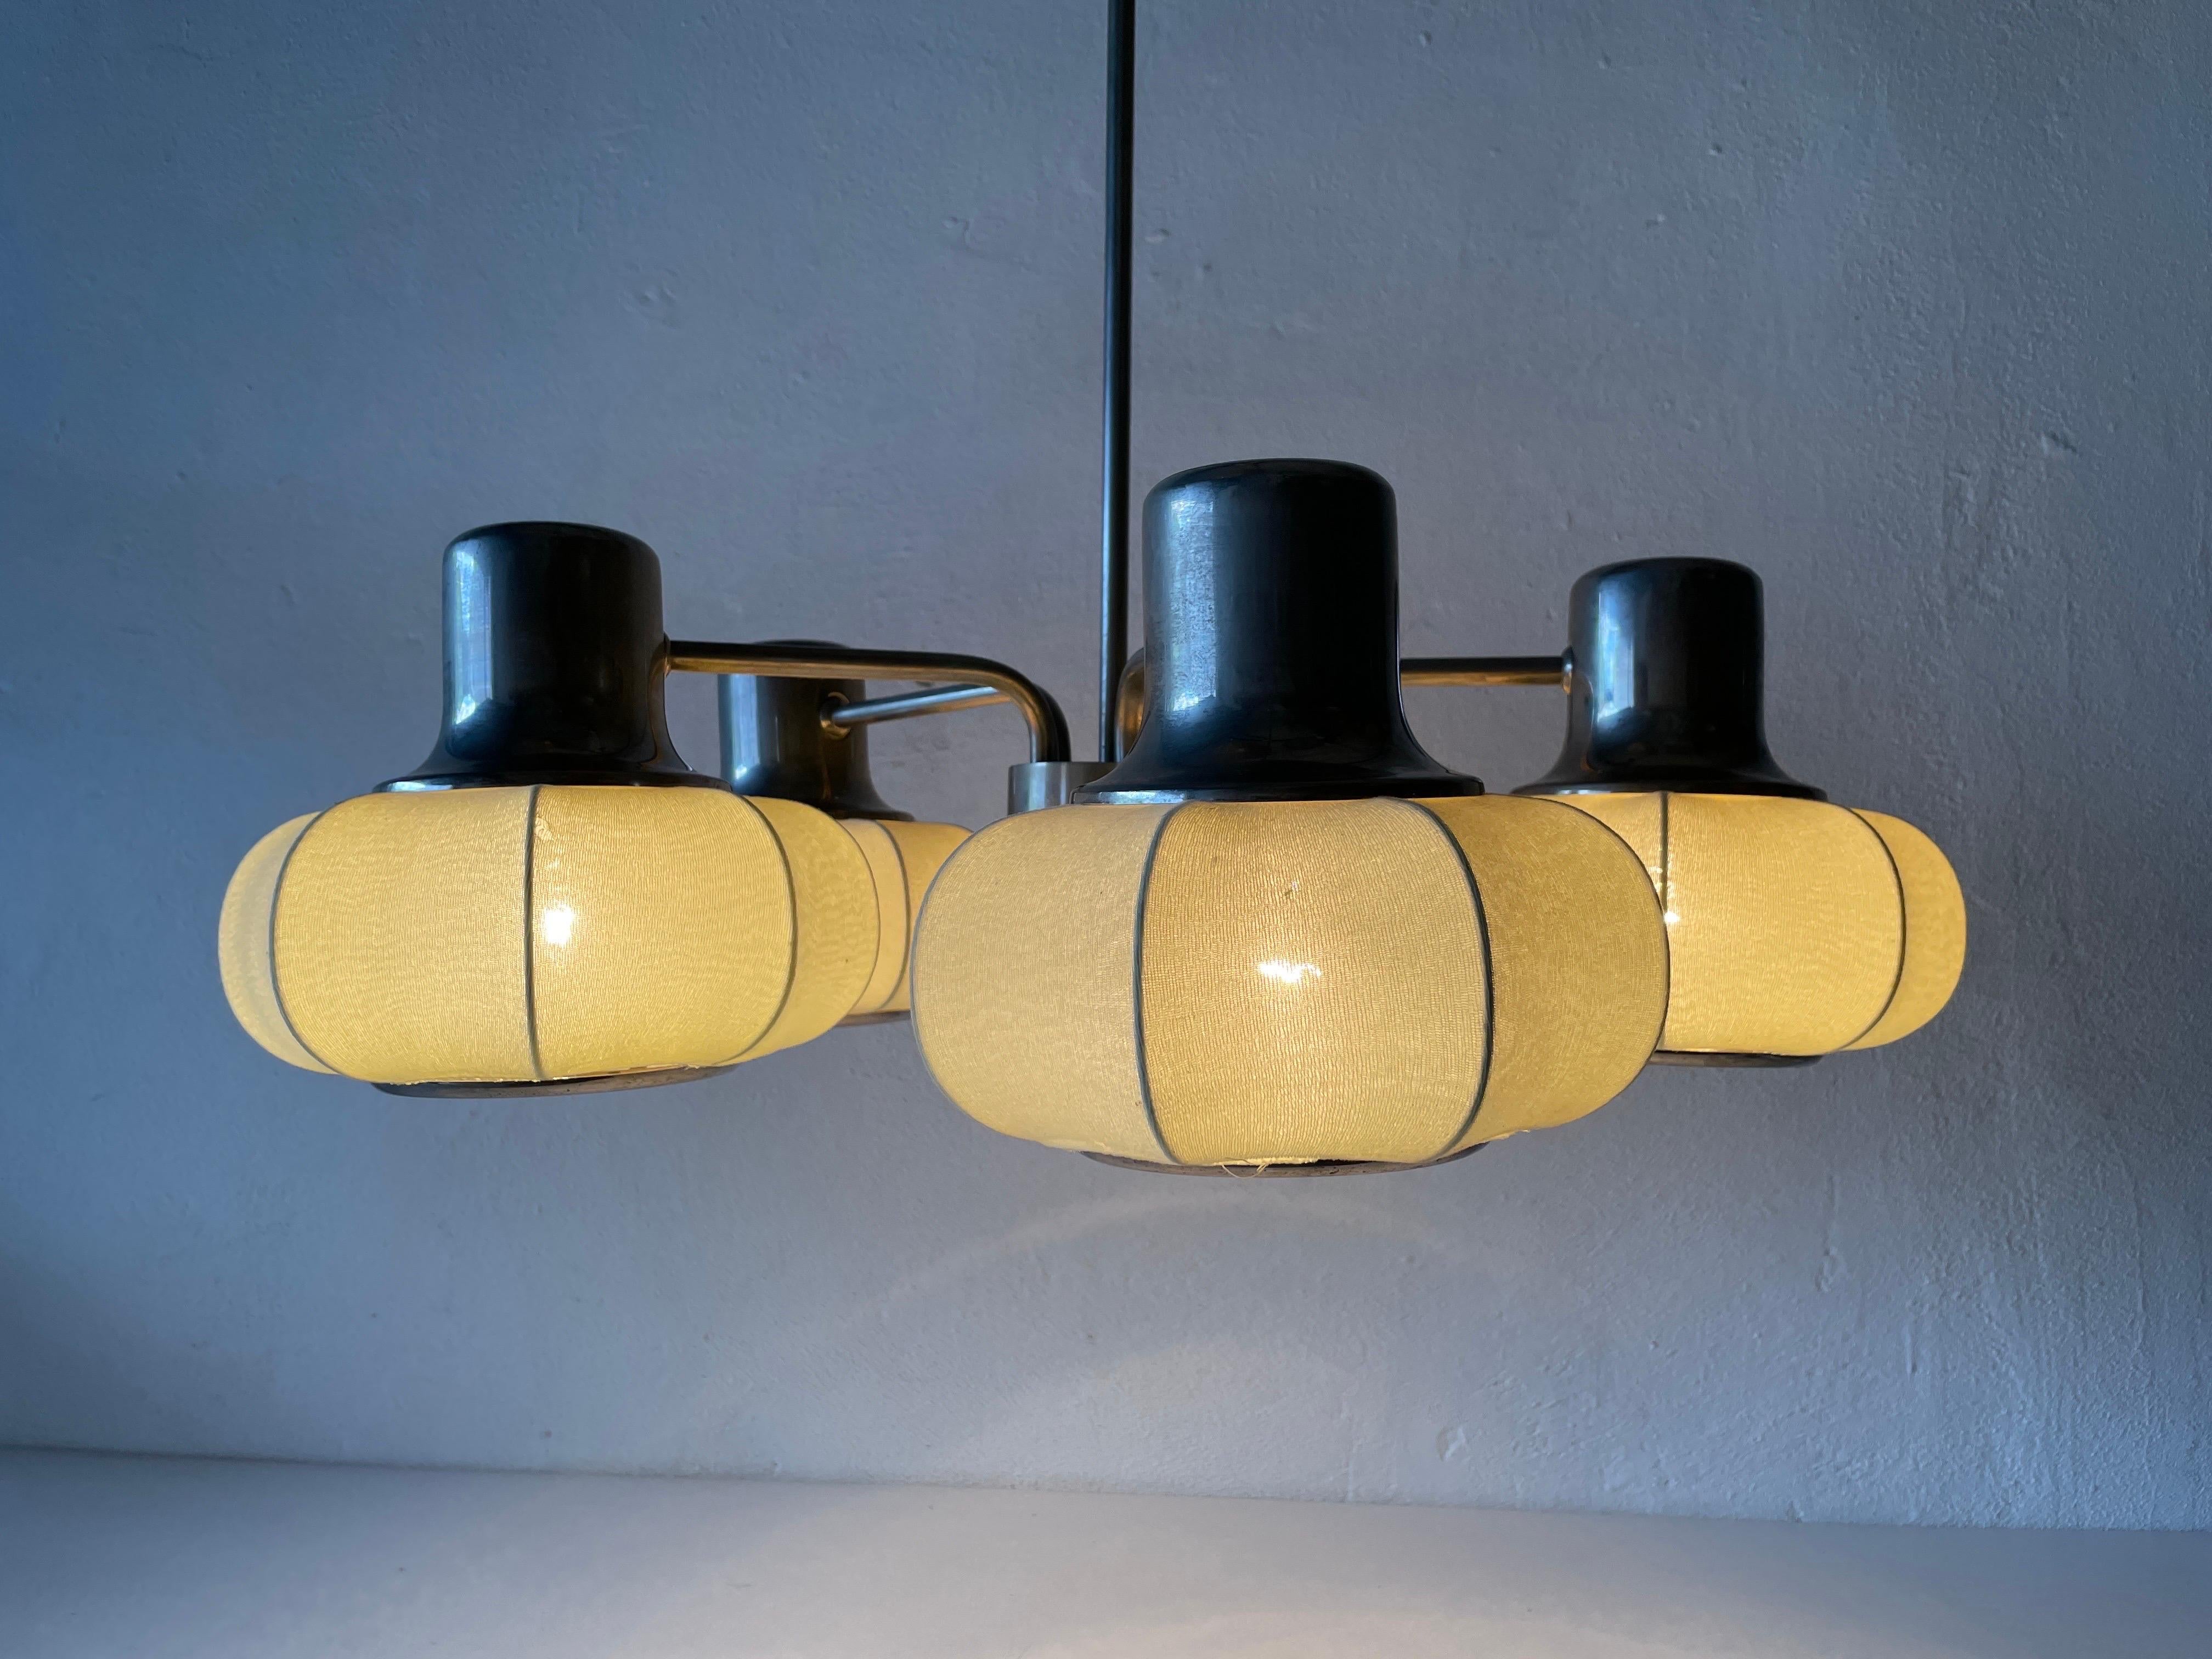 5-armed Metallic Chandelier with Fabric Shades by VEB Leuchten, 1950s, Germany For Sale 3